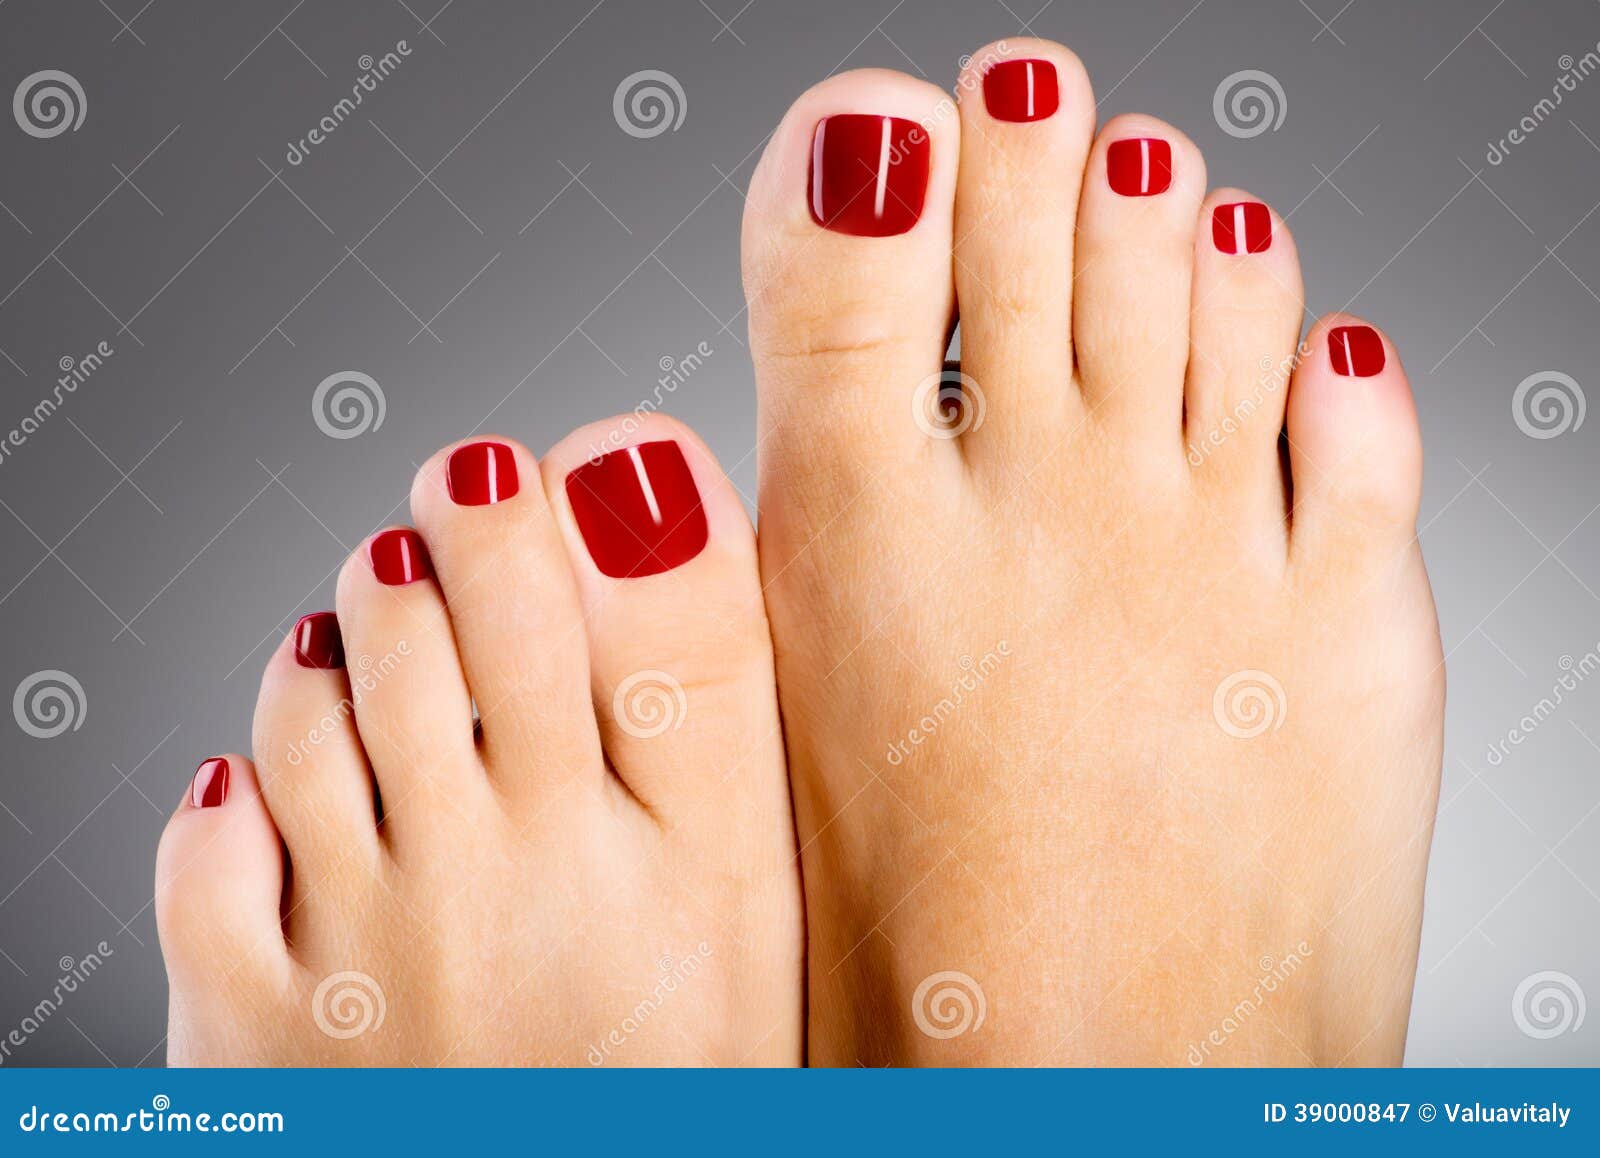 Beautiful Female Feet With Red Pedicure Stock Photo - Image: 39000847